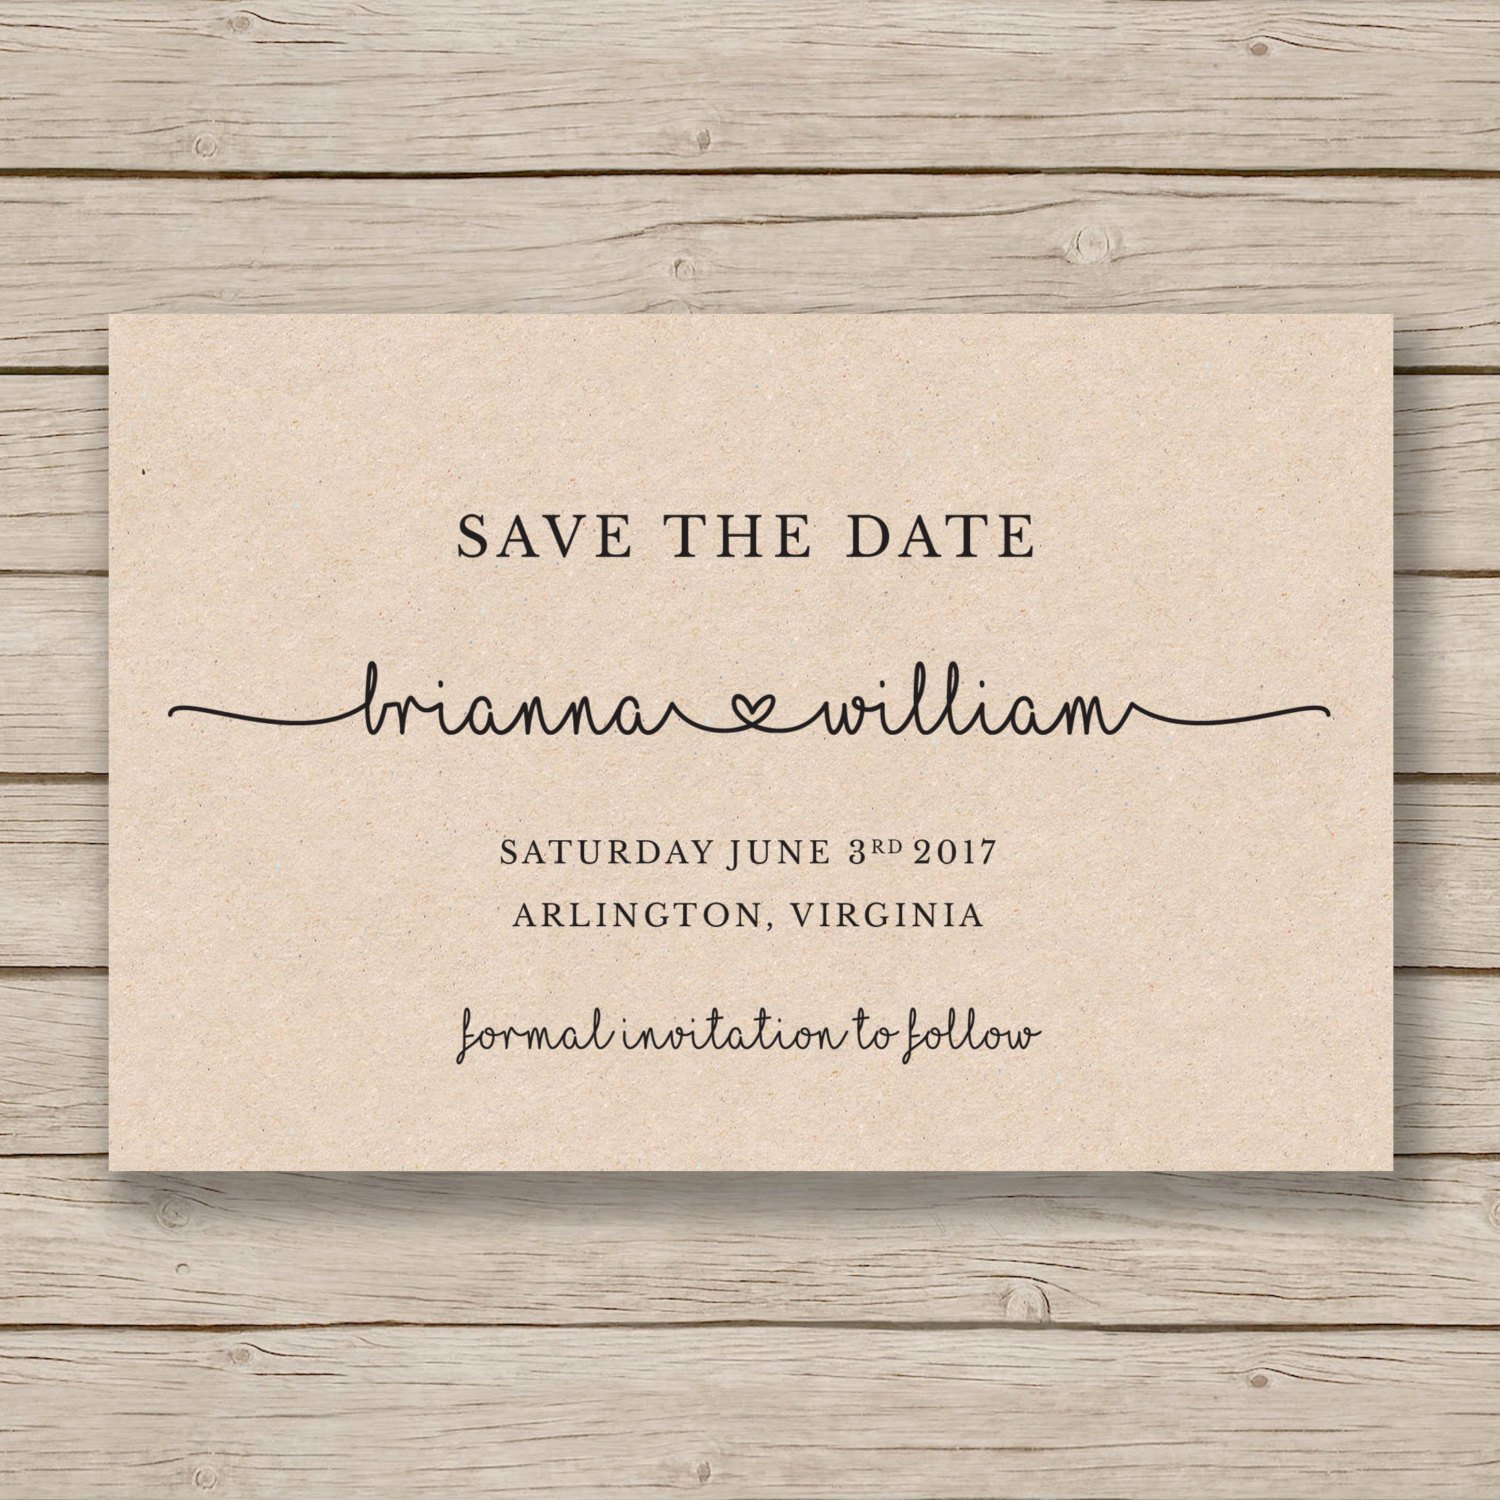 Postcard Save the Date Template Fresh Save the Date Printable Template Editable by You In Word